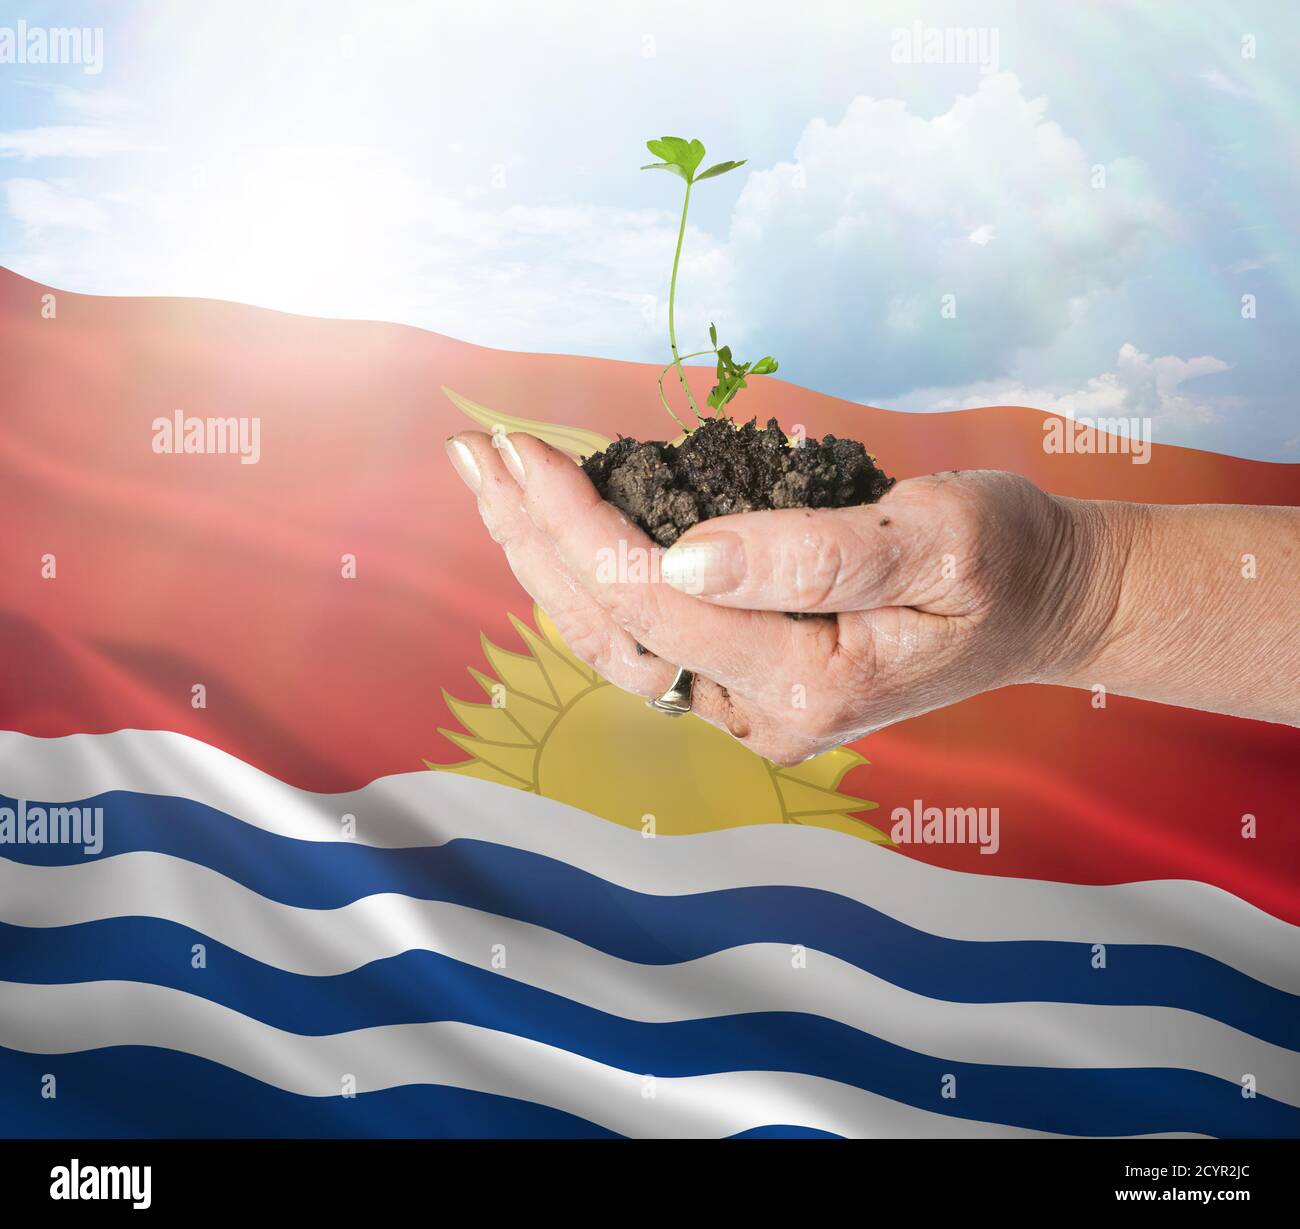 Kiribati growth and new beginning. Green renewable energy and ecology concept. Hand holding young plant. Stock Photo